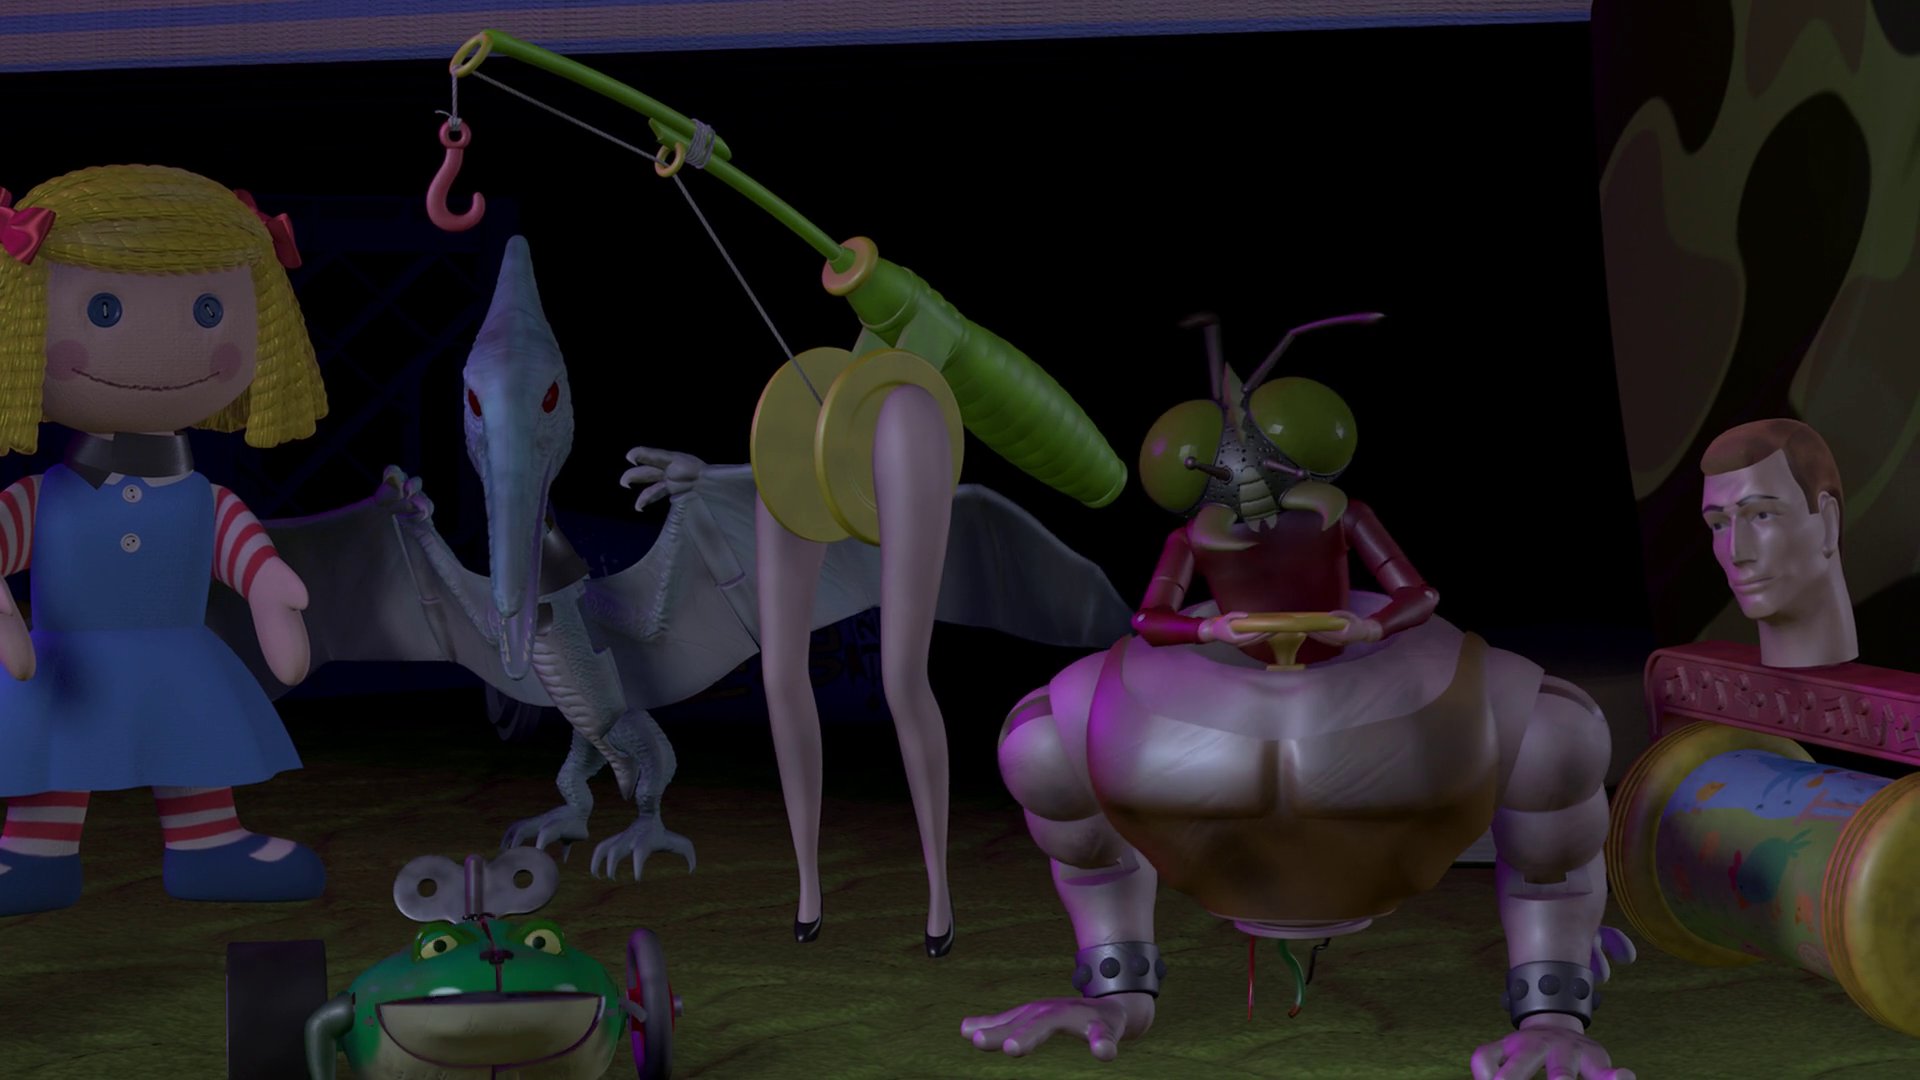 𝕞𝕠𝕧𝕚𝕖𝕡𝕠𝕝𝕝𝕫 on X: Toy Story has a hooker doll. Sid took female toy  legs and made it into a doll that can hook things, hence hooker. Clever,  Pixar. Although they couldn't call